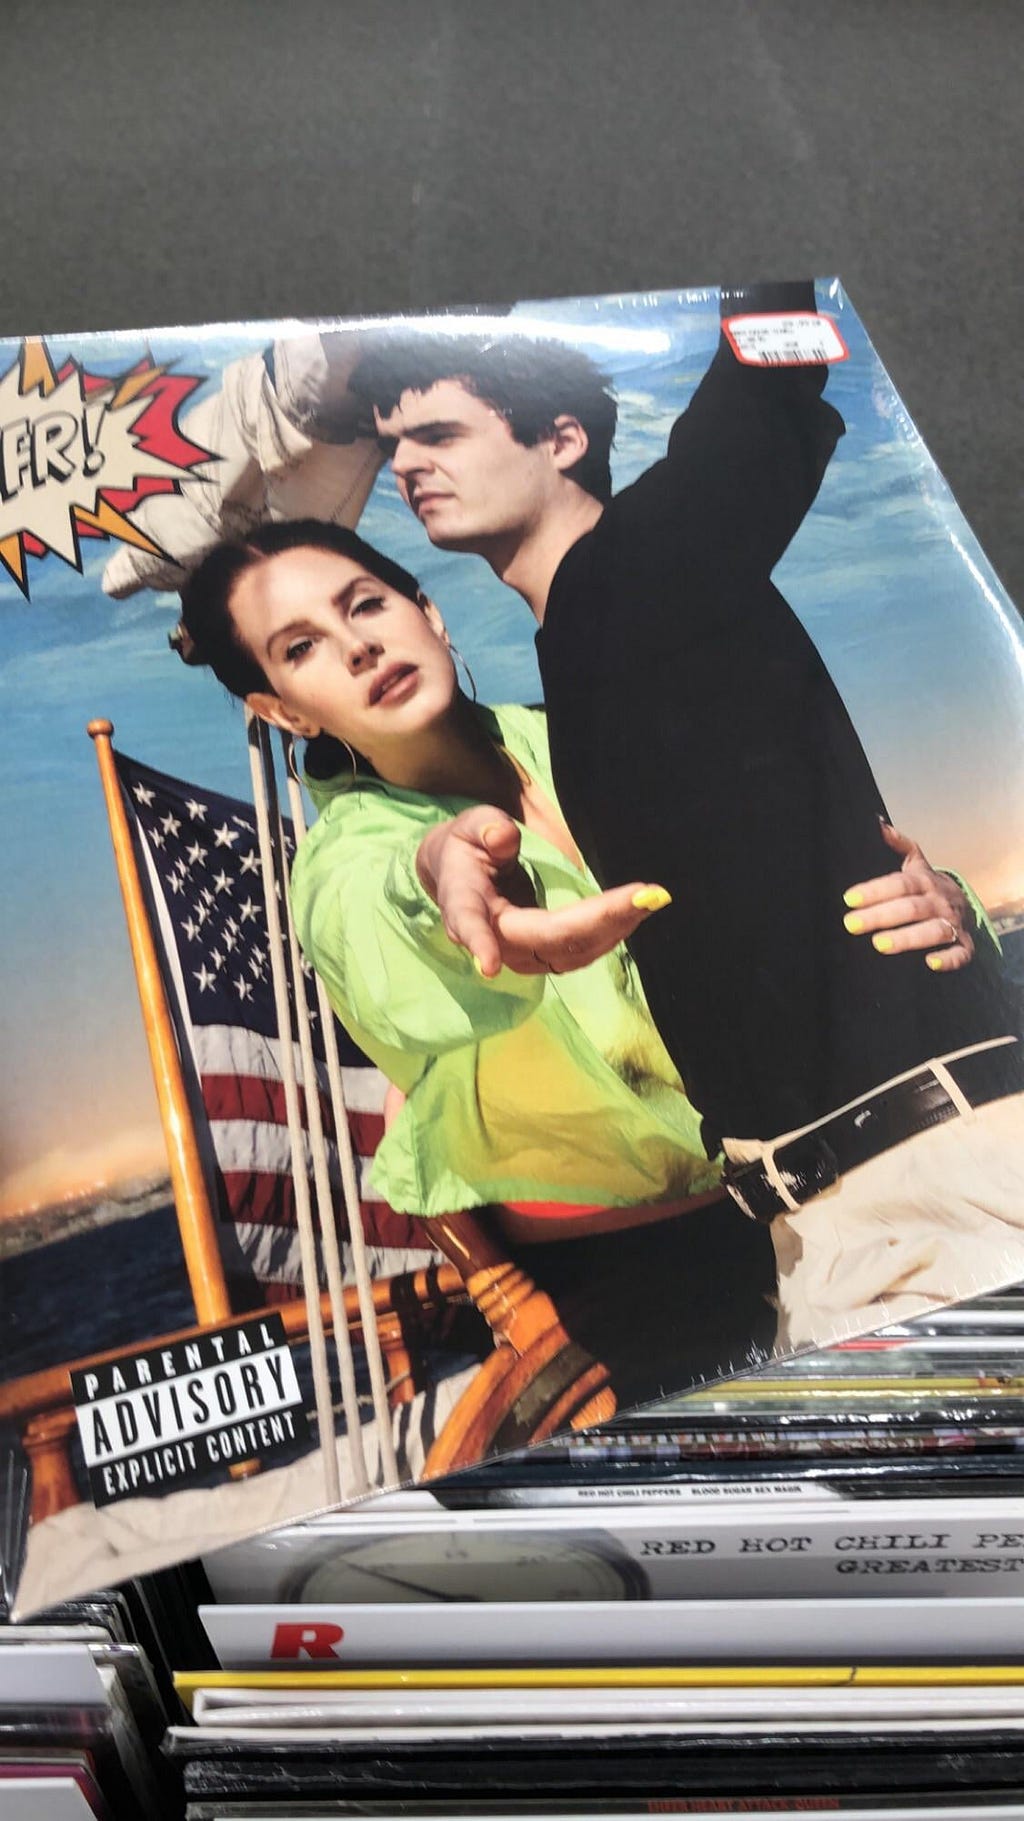 The physical, vinyl cover of Lana Del Rey’s “Norman F******g Rockwell!”